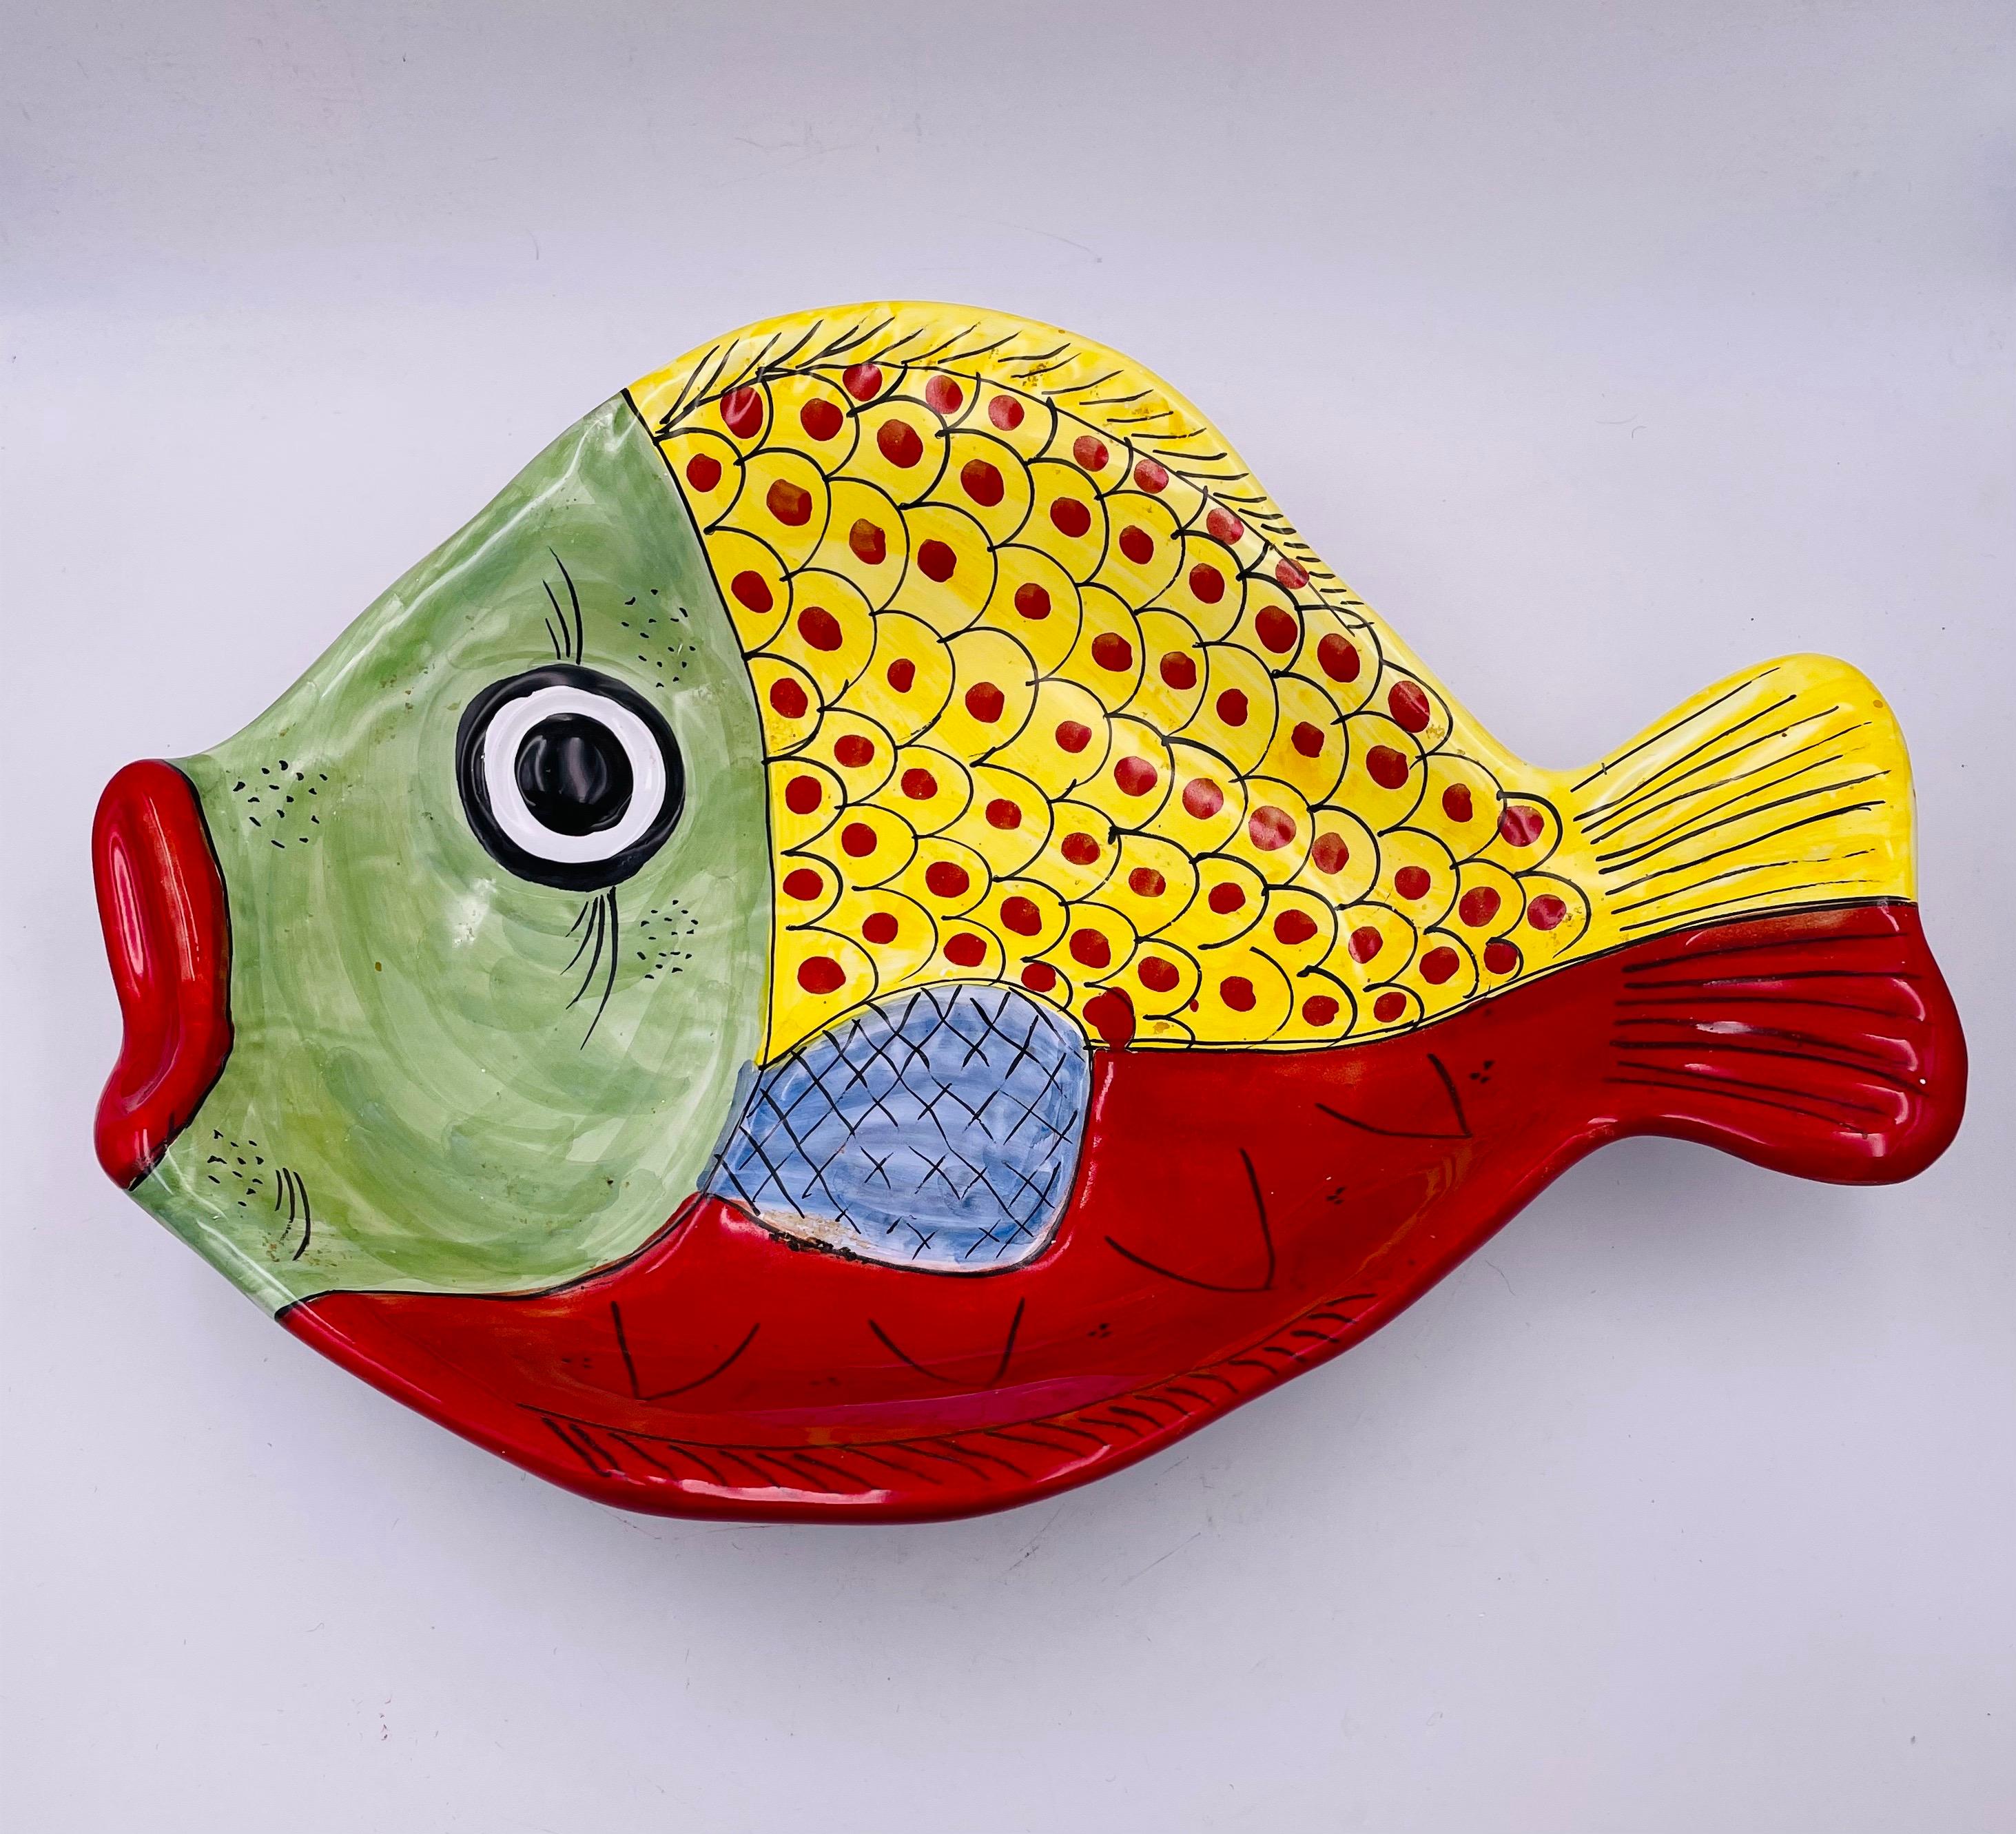 Beautiful decorative hand-painted Italian large ceramic fish plate-bowl by Vietri Italy. The plate is in great condition with no chips or cracks and very light wear, large size can be hung on the wall if desired a great piece of art.